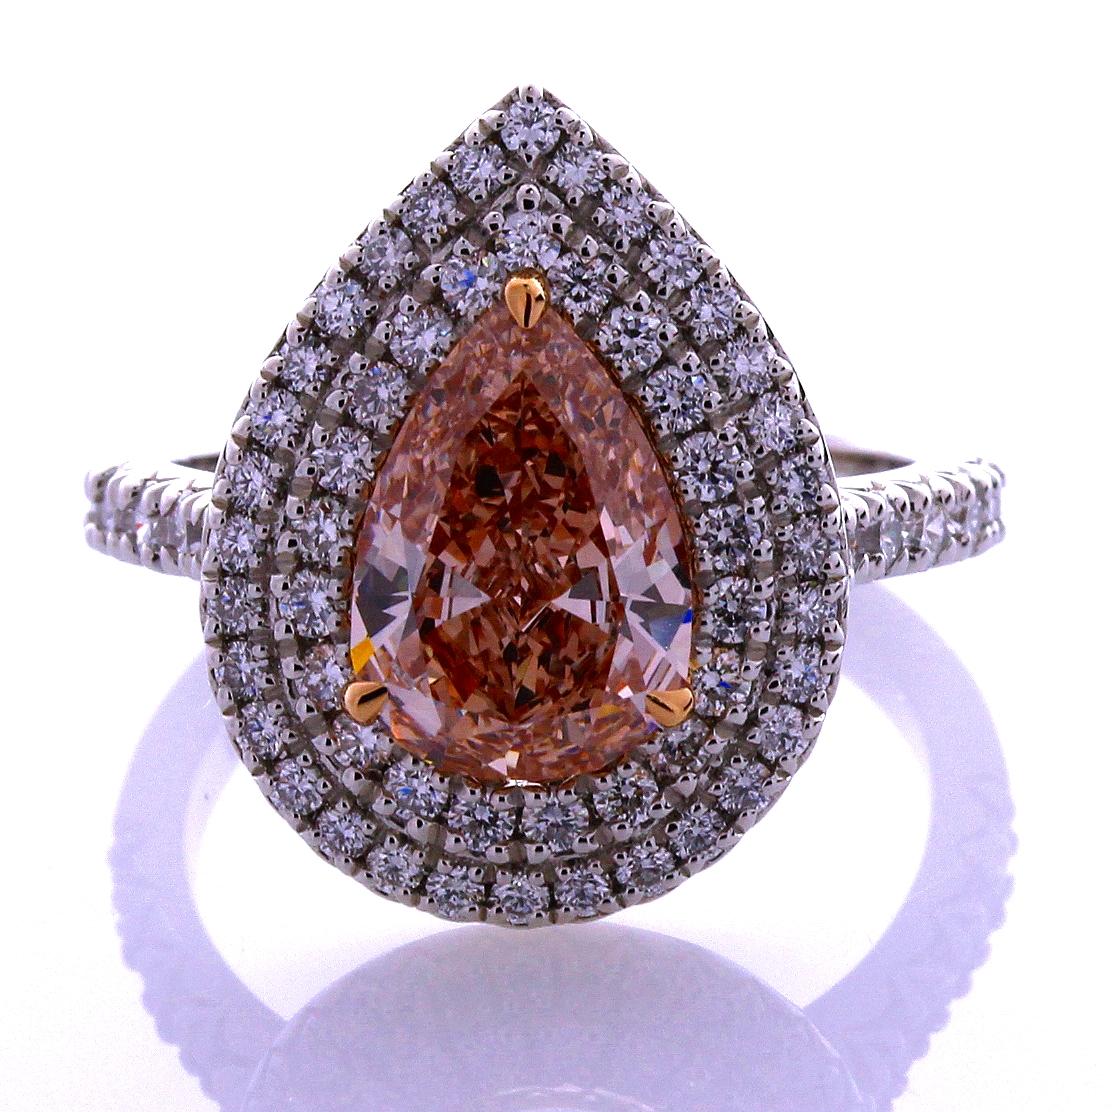 Incredible Deal on GIA Certified 1.59 carat Pear Shape, Natural Fancy Brown-Pink Even Diamond Ring, VS2 clarity, measuring 10.42-7.18x3.52. Total Carat Weight on the ring is 2.38.
GIA CERTIFICATE #6194904699. 
This classic contemporary mounting was